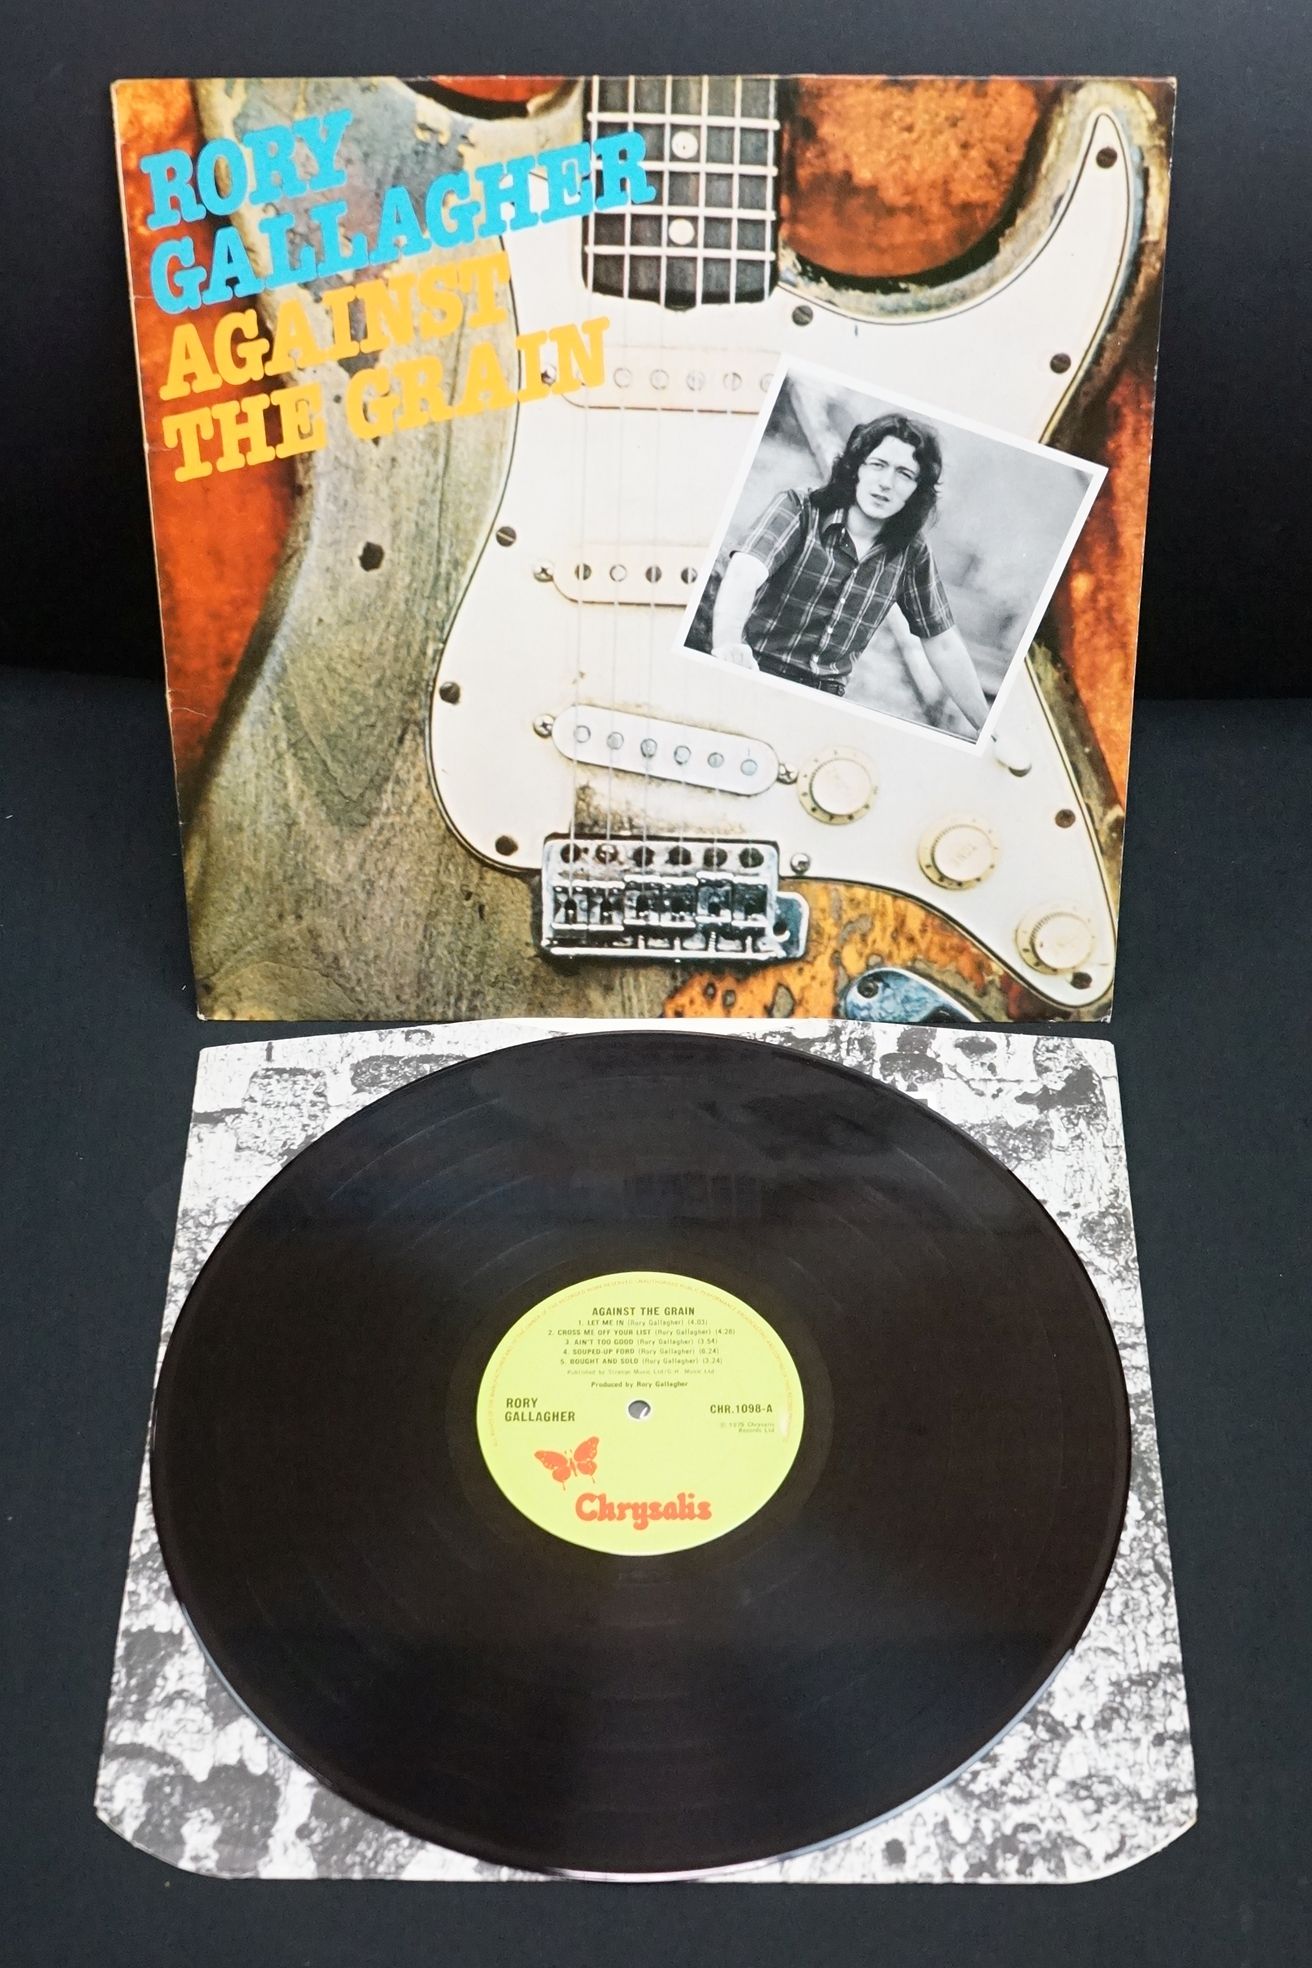 Vinyl - 12 Taste / Rory Gallagher LPs to include On The Boards, Self Titled (583042), Blueprint, - Image 8 of 16